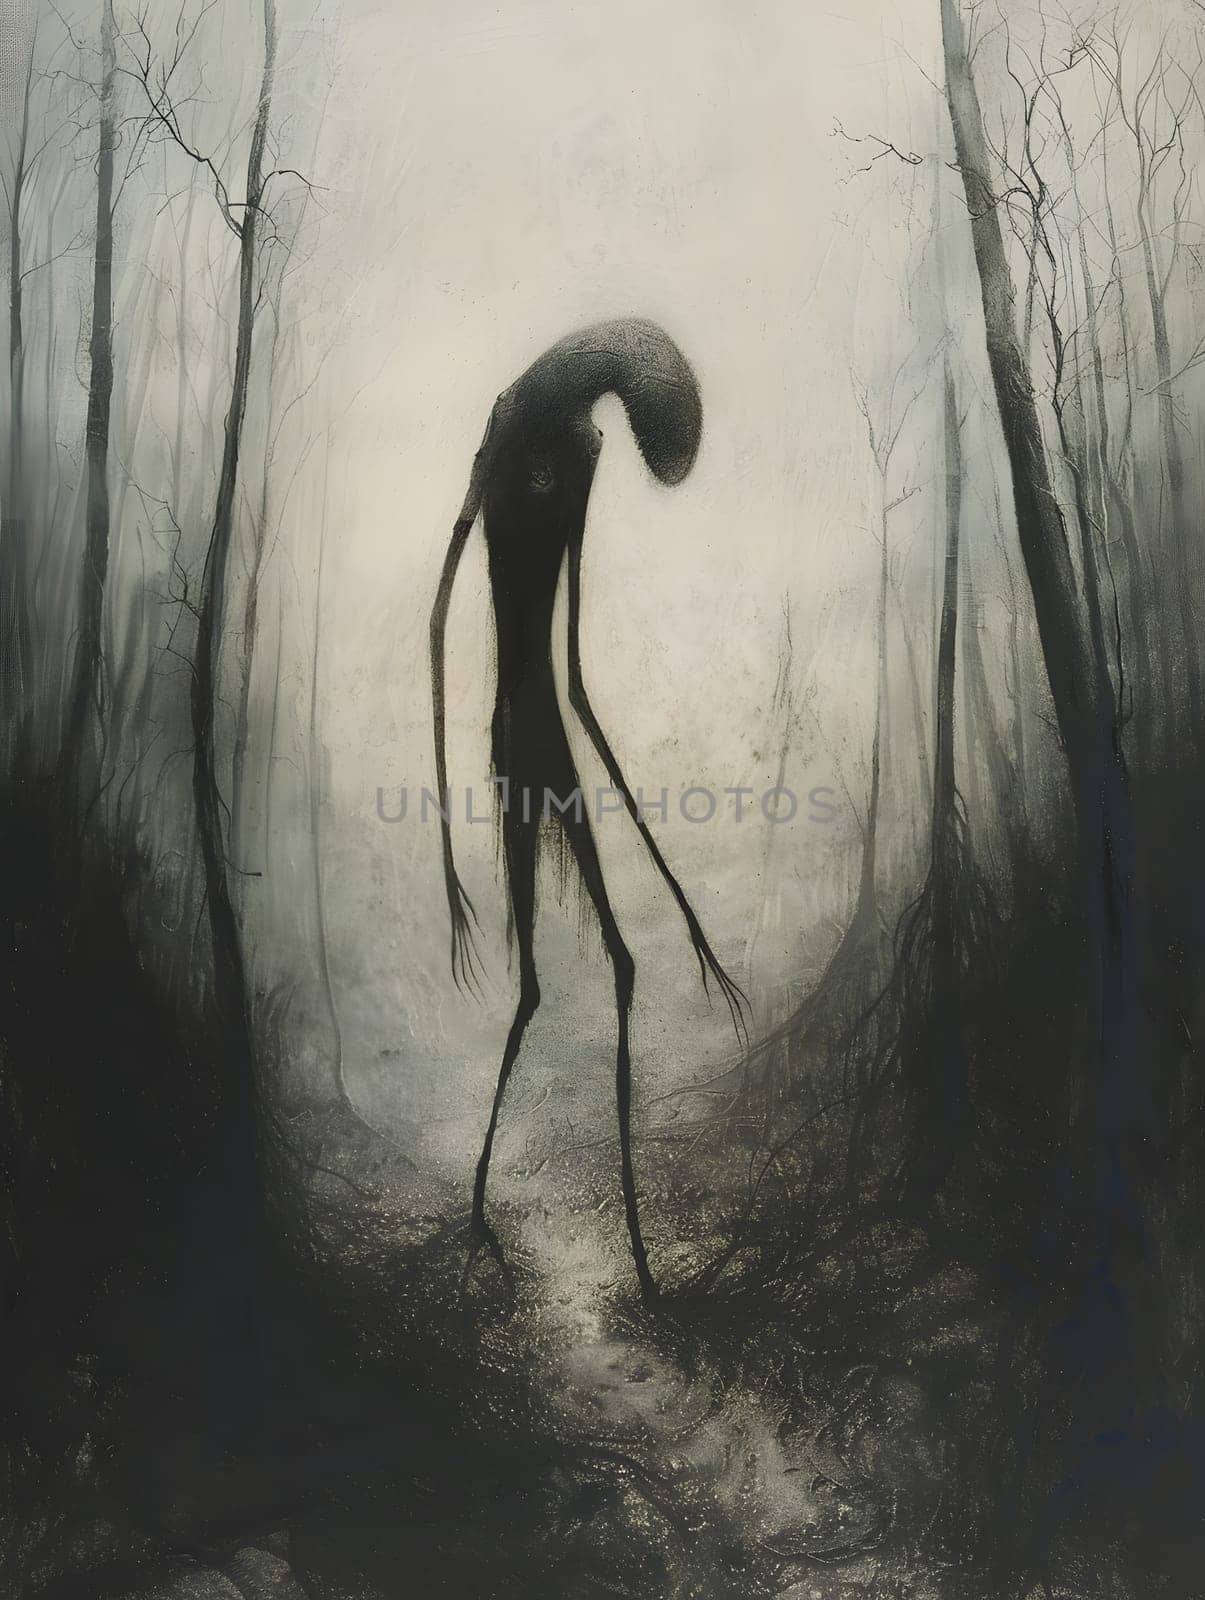 A monochromatic painting of a mysterious creature in a forest setting by Nadtochiy